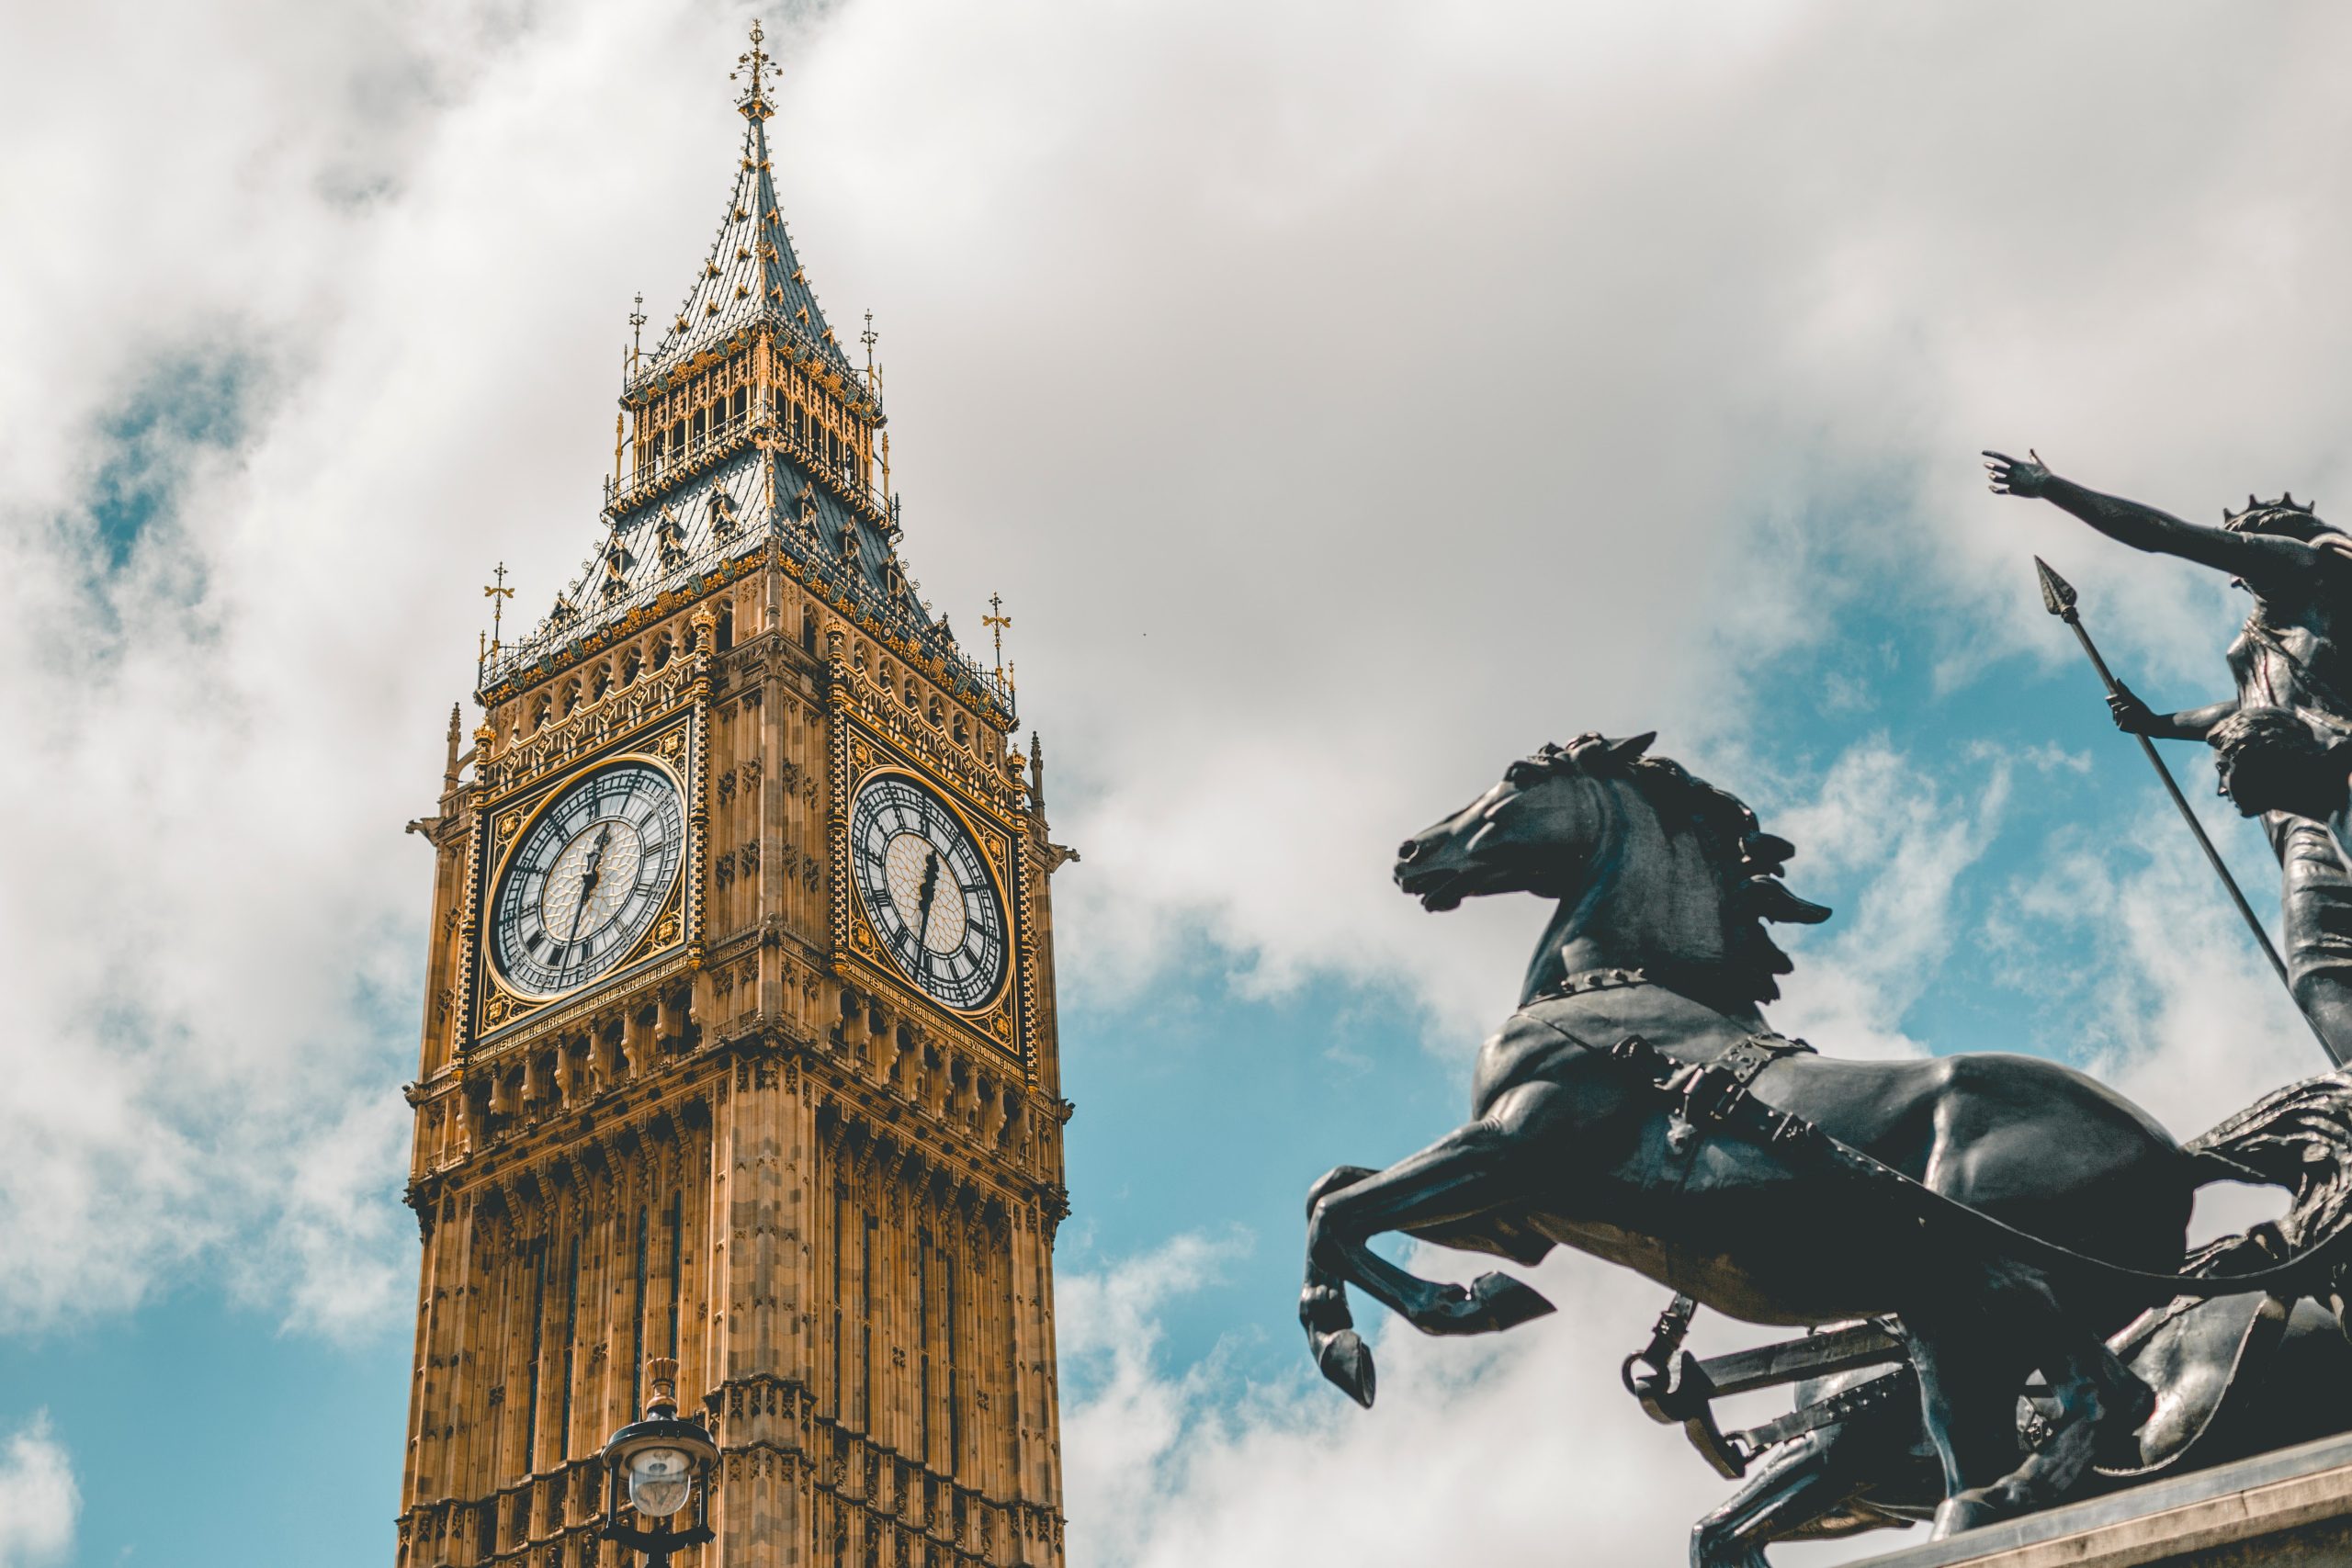 Big Ben and Horse Statue in London